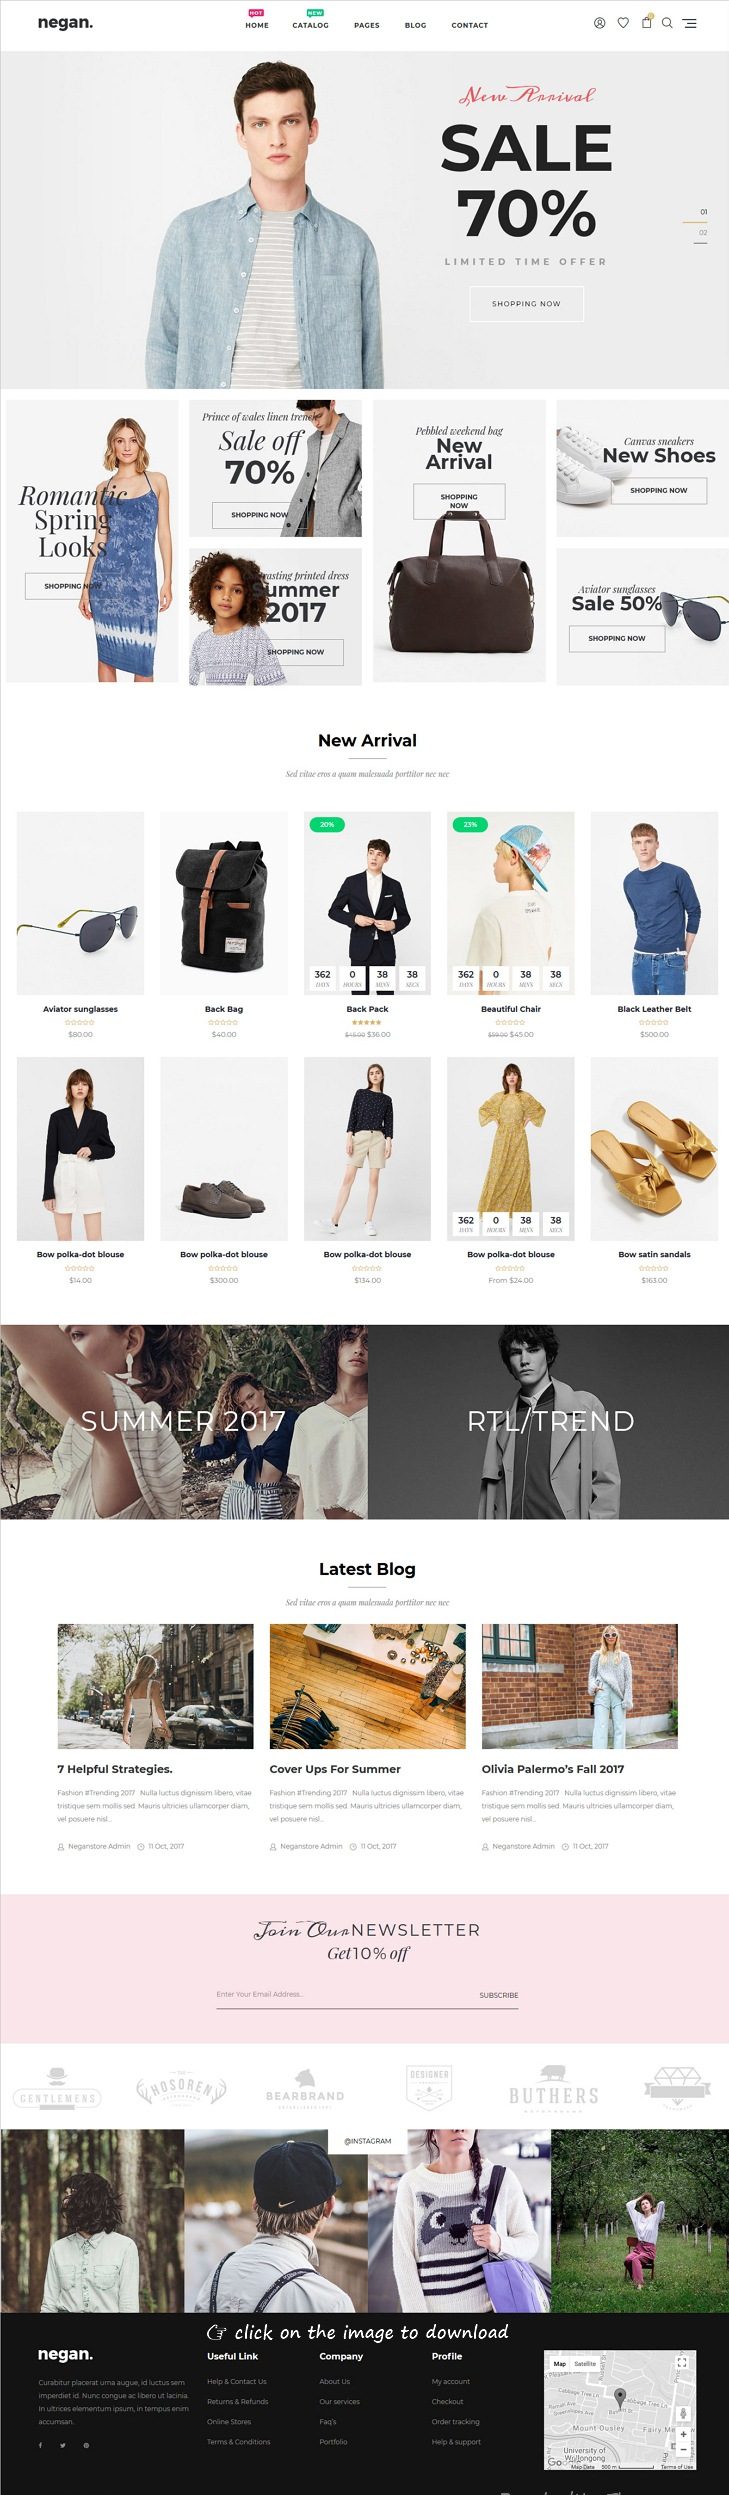 Top Shopify fashion store themes collection increase your sale - Negan - Clean, Minimal Shopify Theme